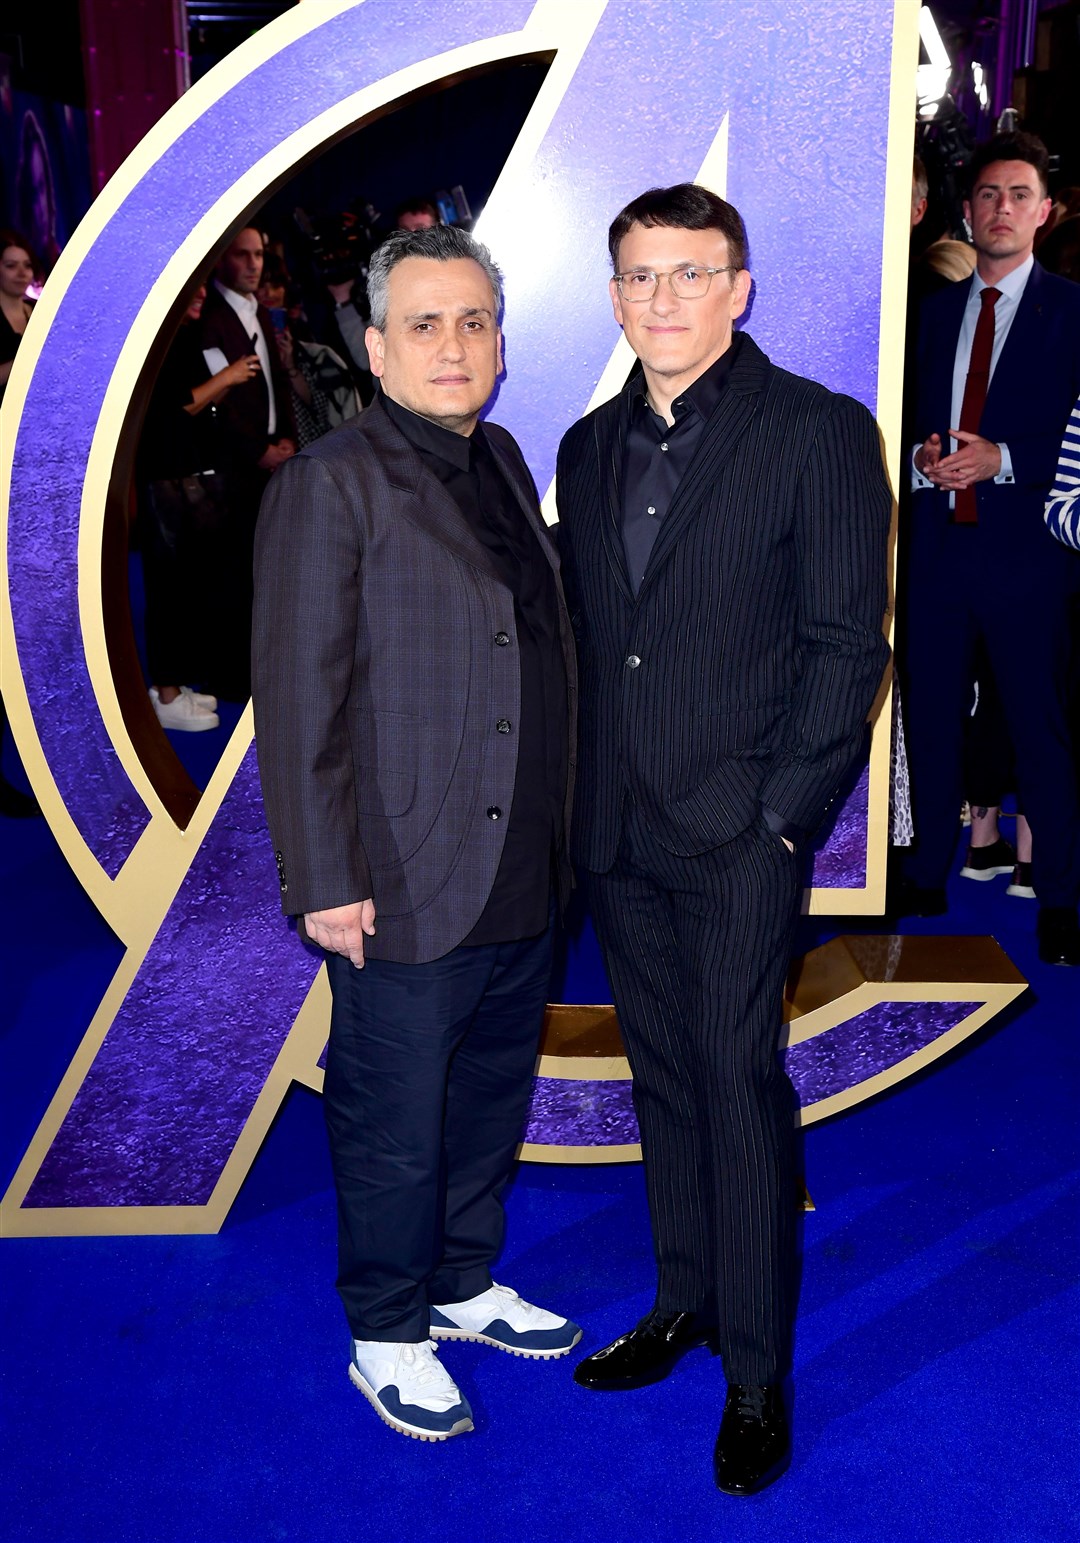 Joe Russo (left) and Anthony Russo attending a previous Avengers: Endgame event in London (Archive/PA)